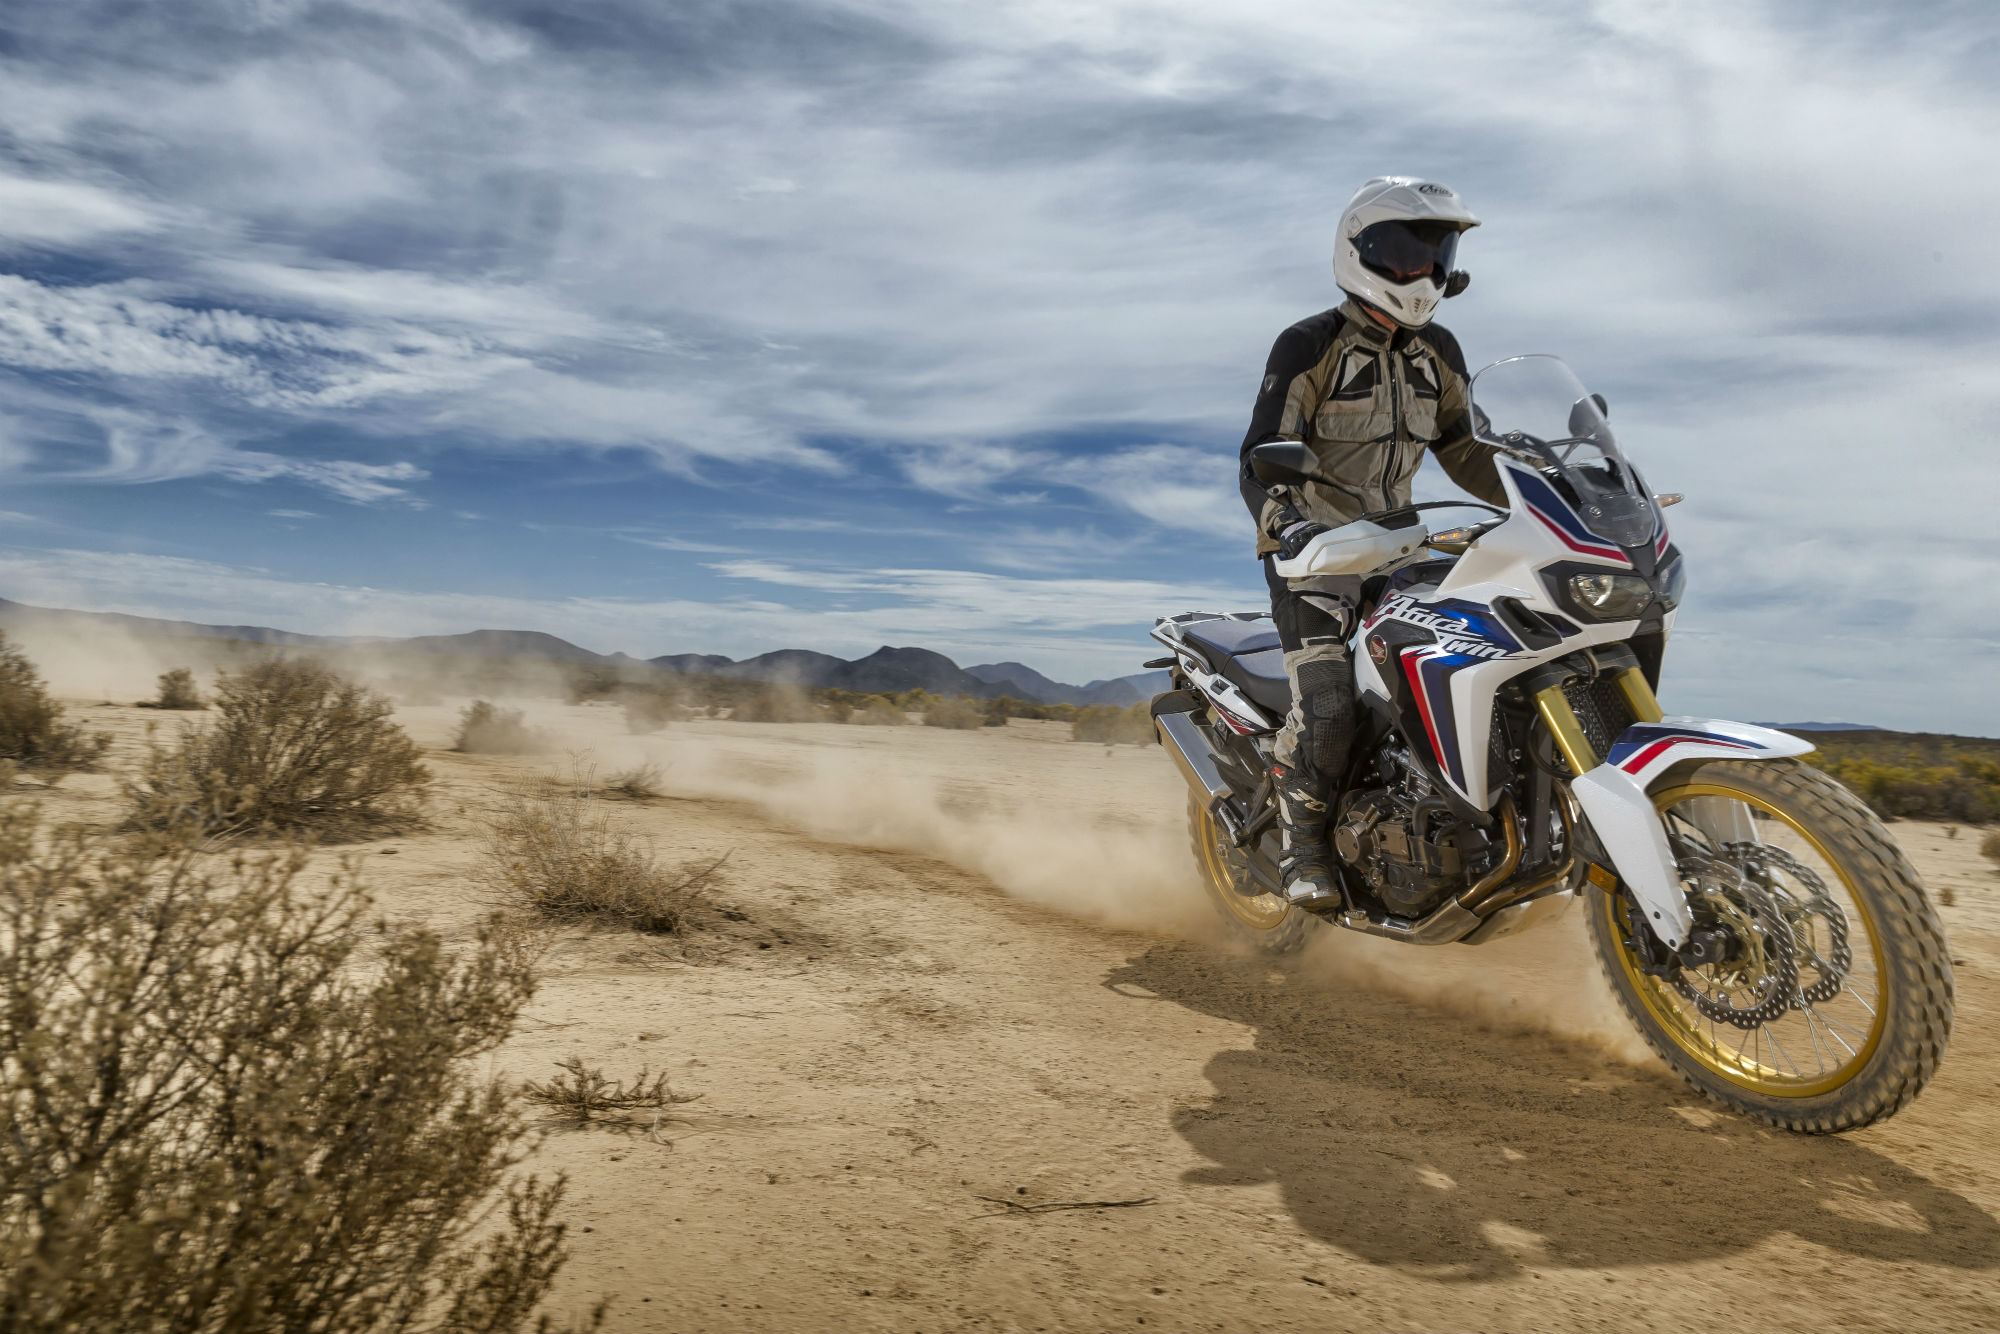 Back-to-back test: BMW R1200GS Adventure vs Honda Africa Twin review